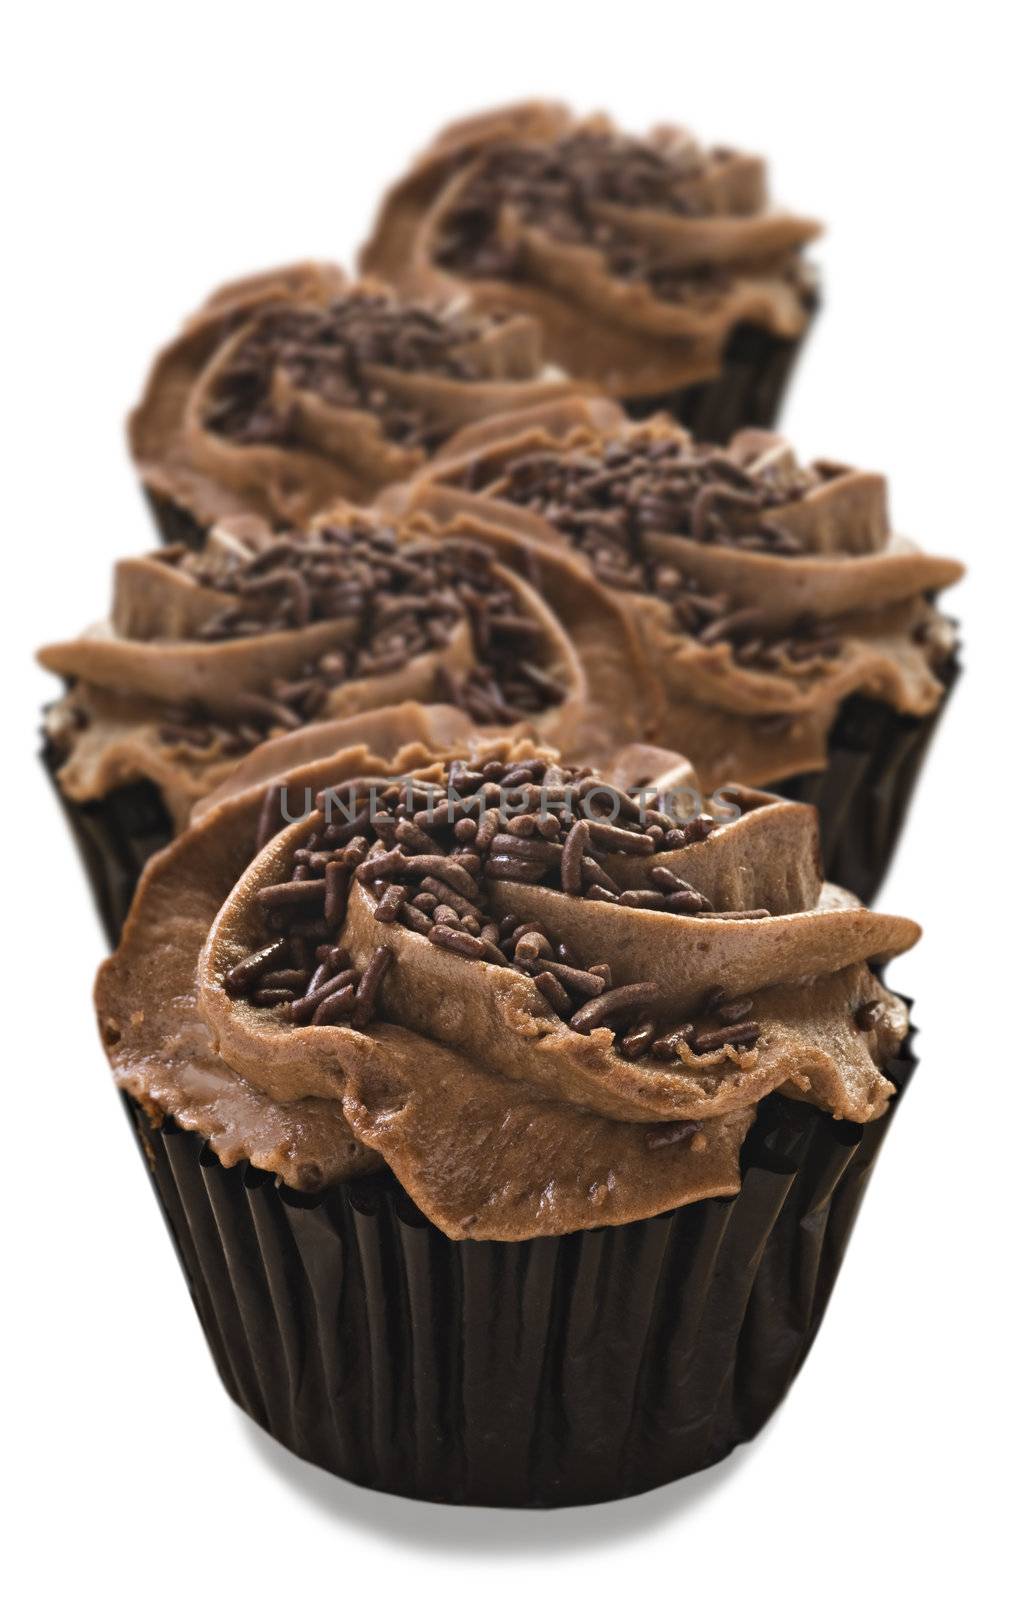 Lovely fresh chocolate cupcakes - very shallow depth of field by tish1